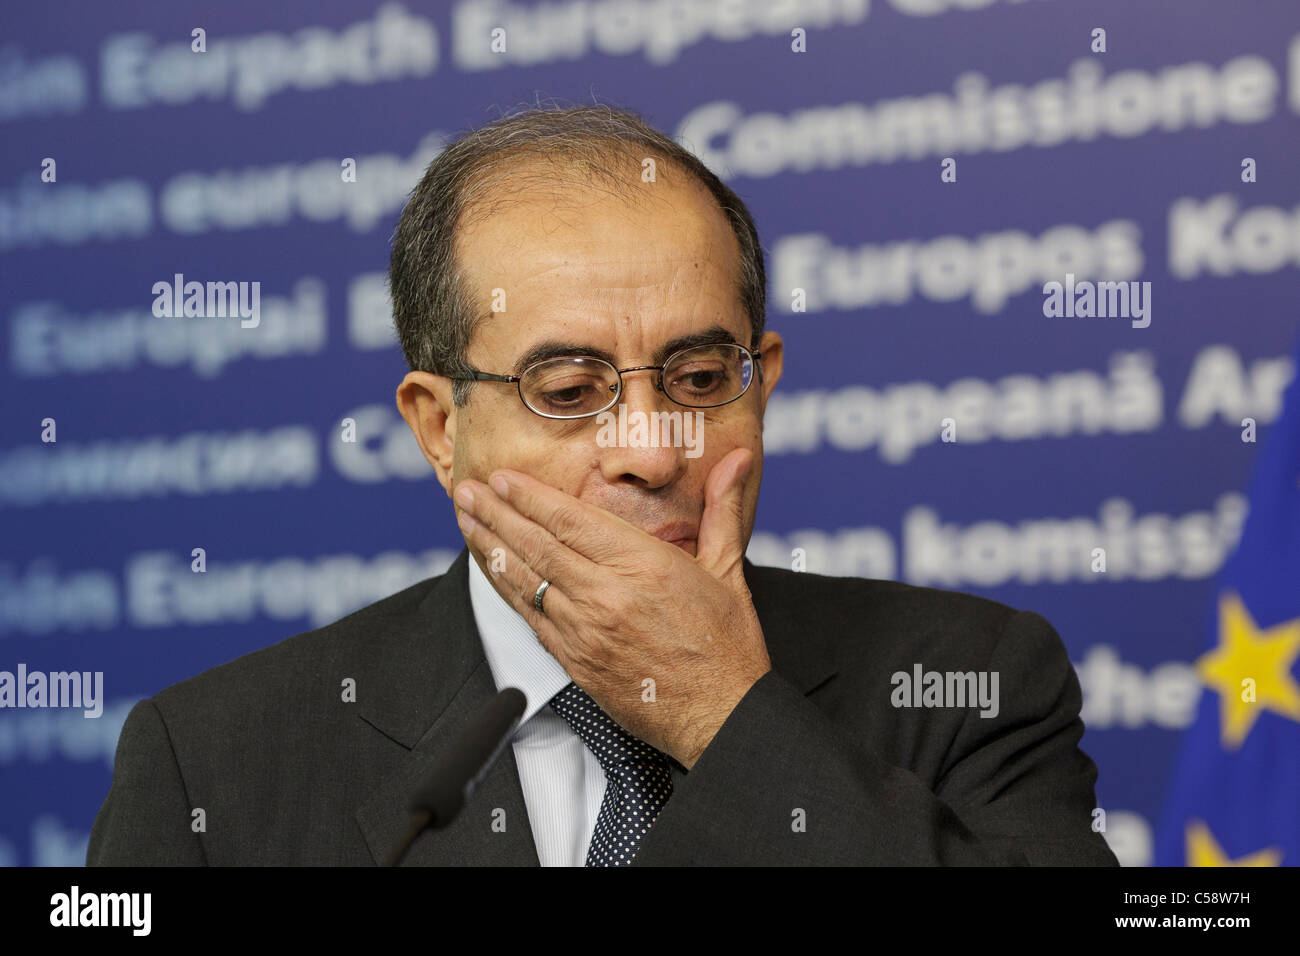 Mahmoud Jibril, Chairman, National Transitional Council of Libya, speaking at the European Commission in Brussels. Stock Photo